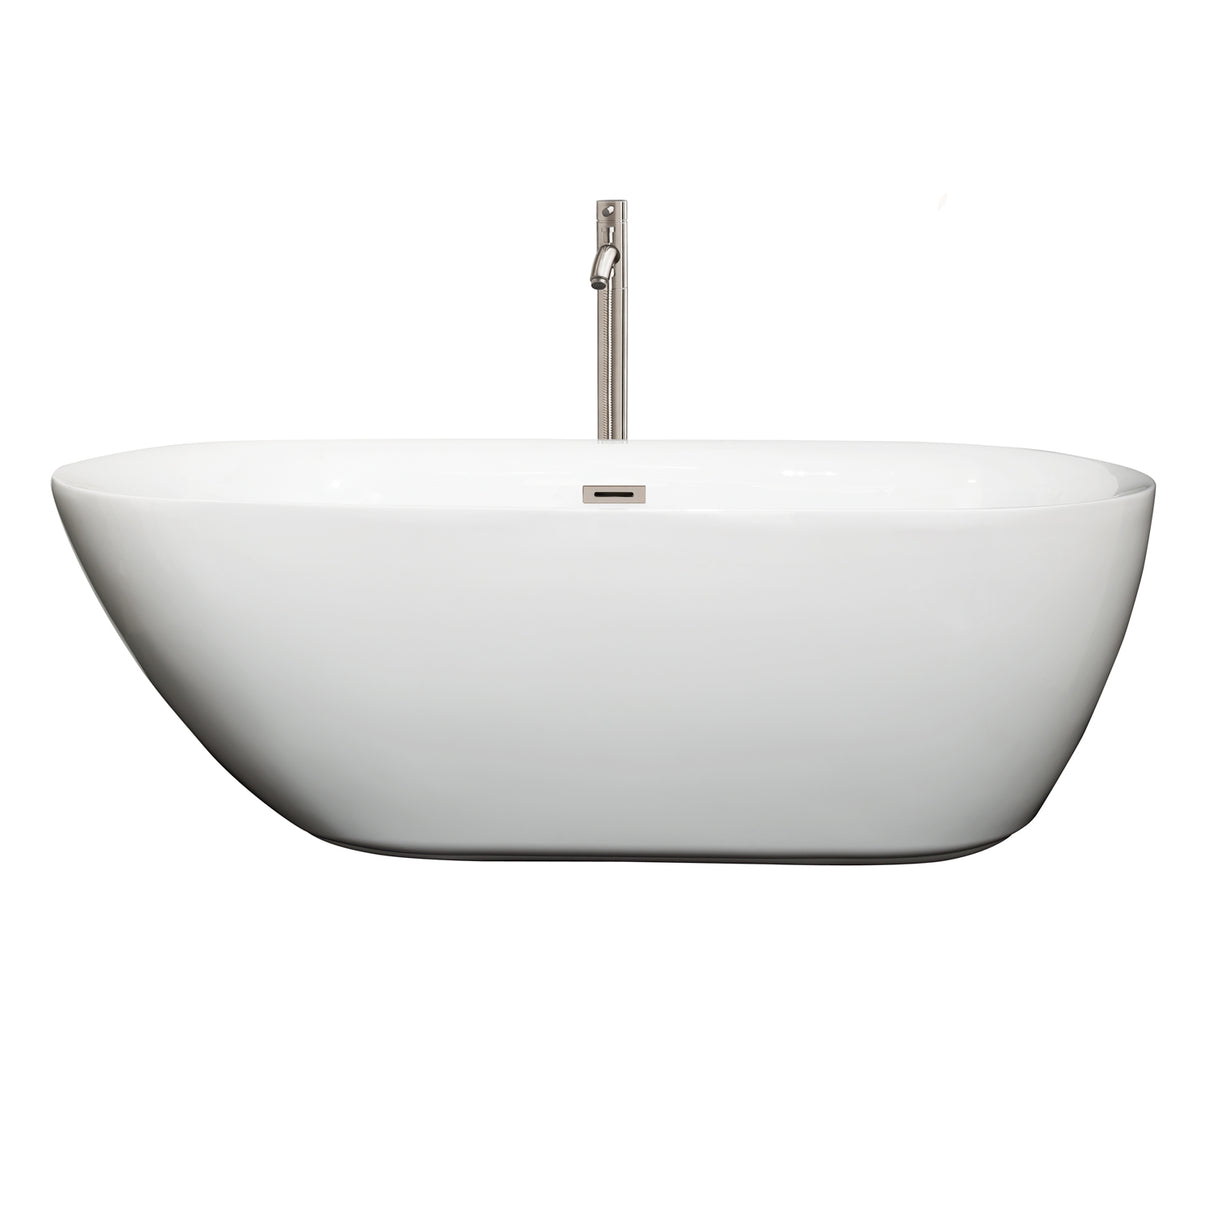 Melissa 65 Inch Freestanding Bathtub in White with Floor Mounted Faucet Drain and Overflow Trim in Brushed Nickel